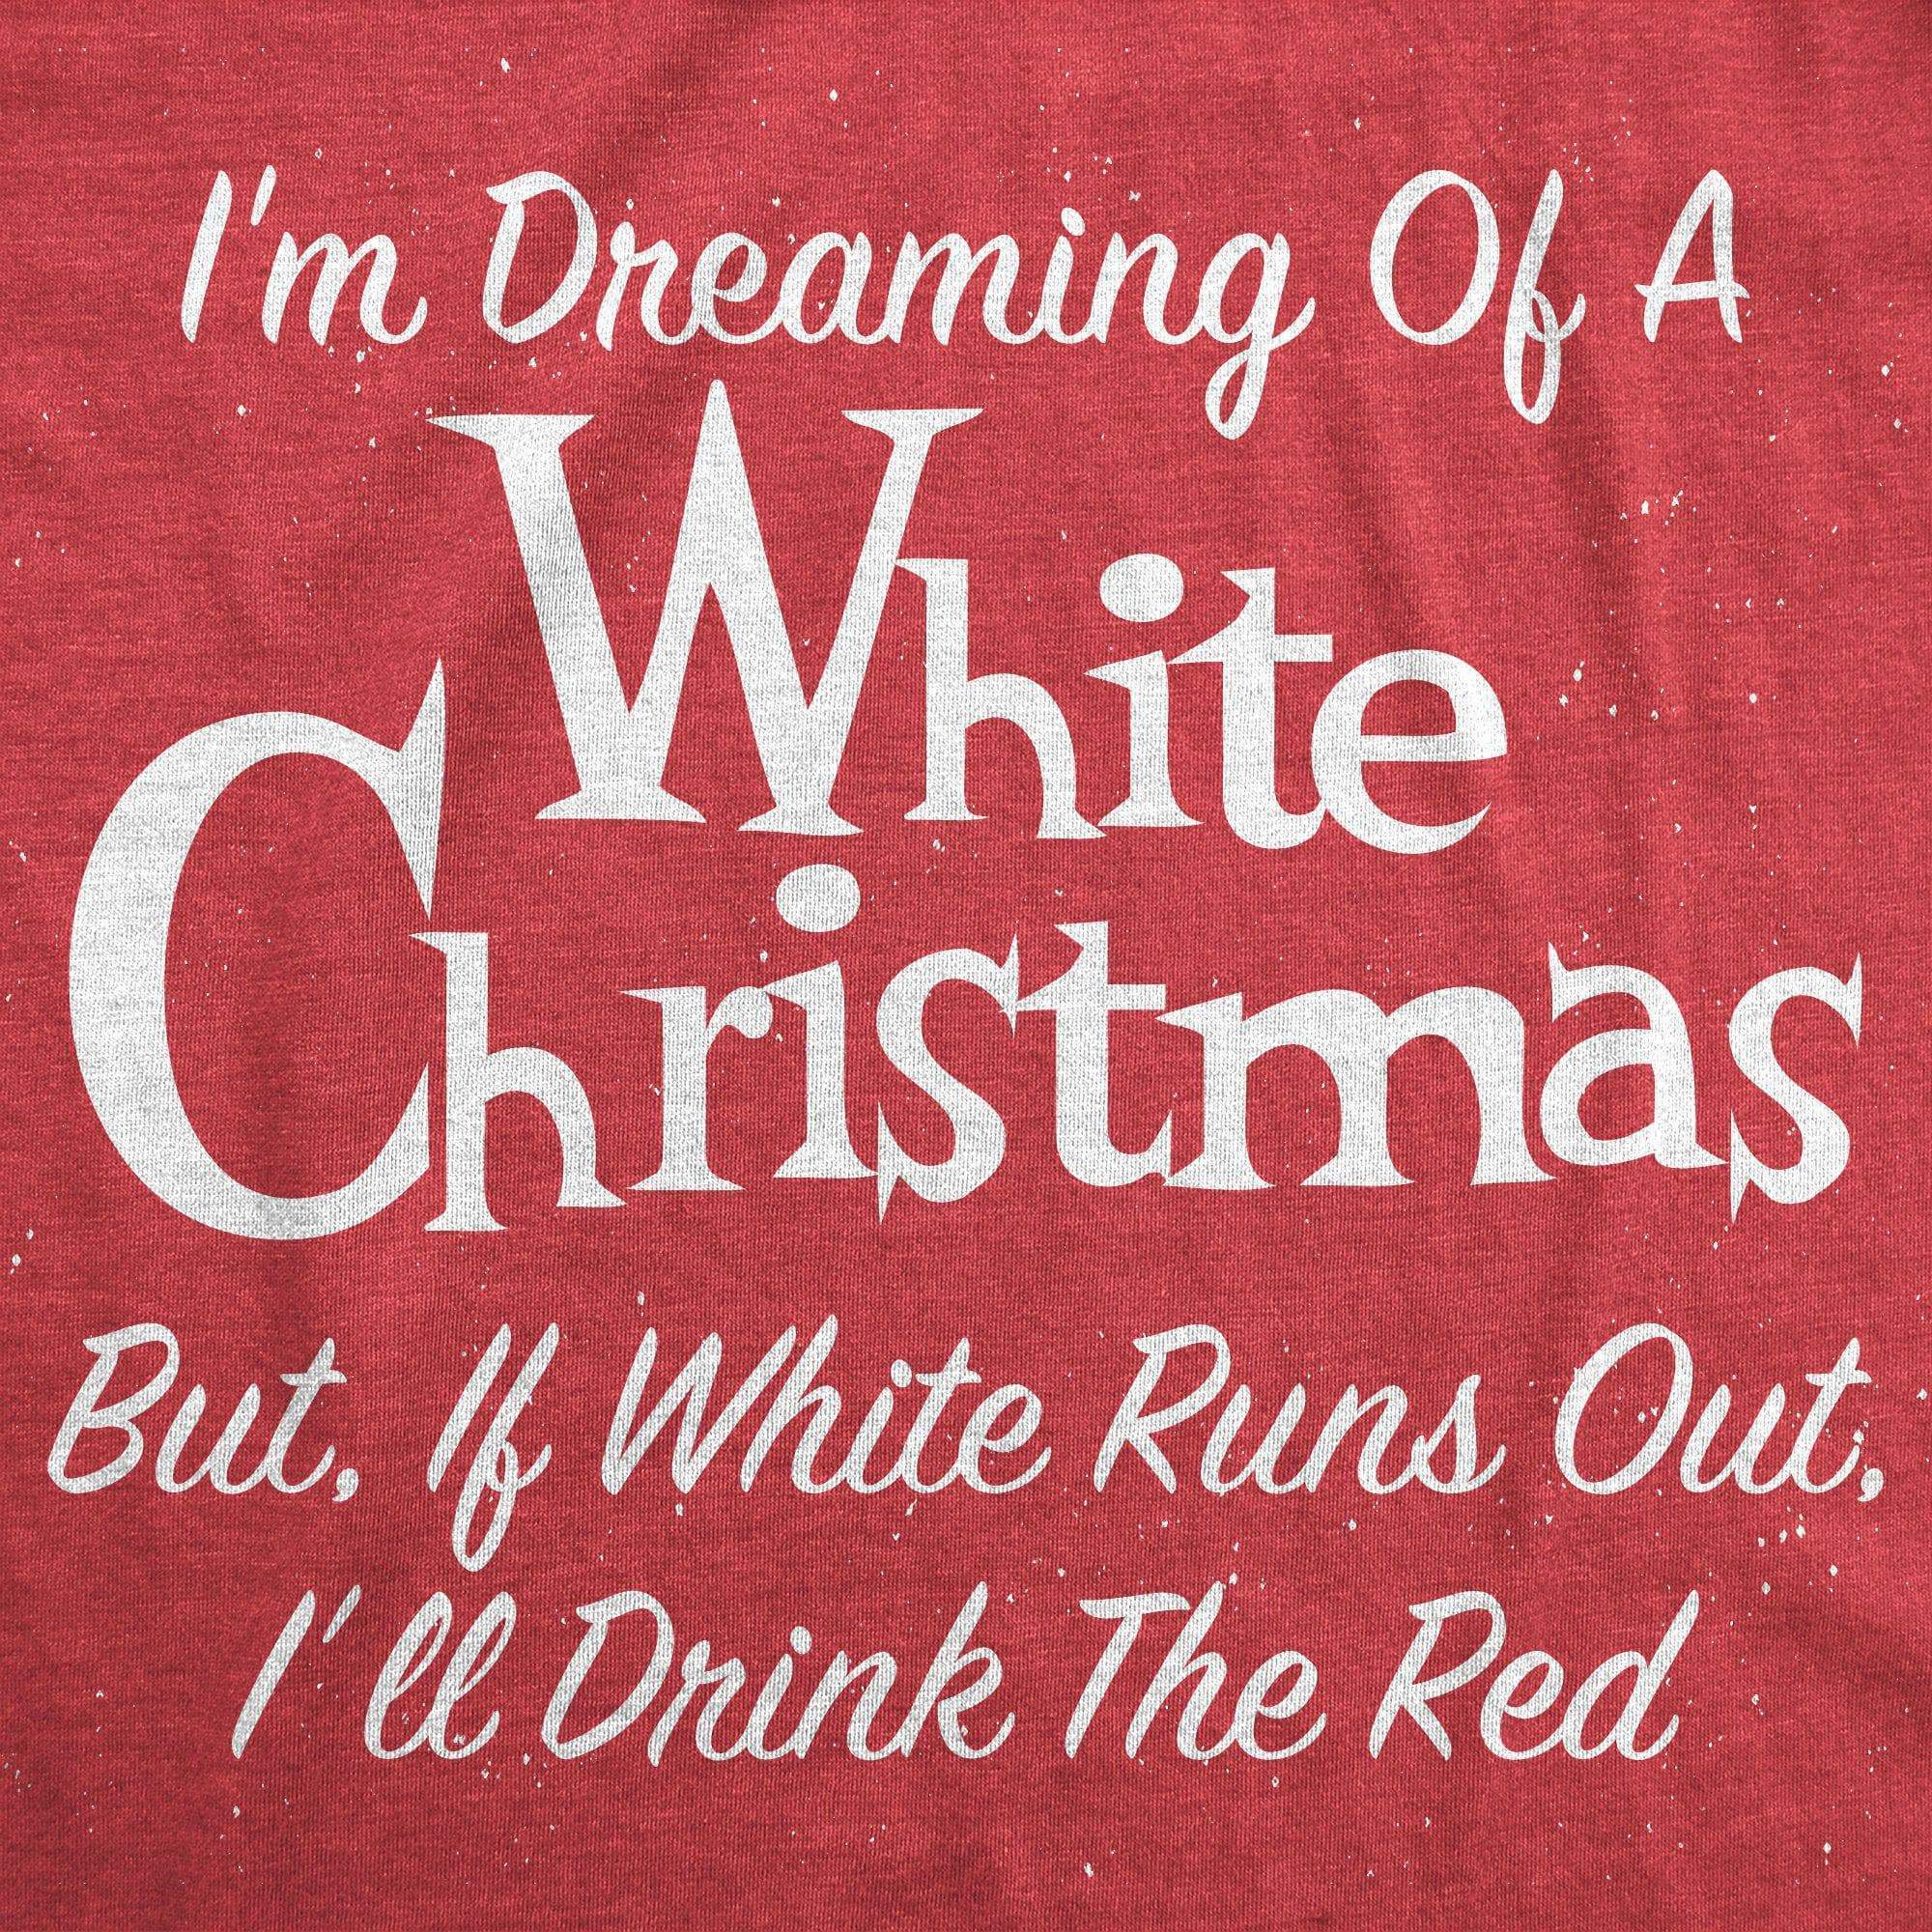 Dreaming Of A White Christmas But If White Runs Out I'll Drink Red Men's Tshirt - Crazy Dog T-Shirts